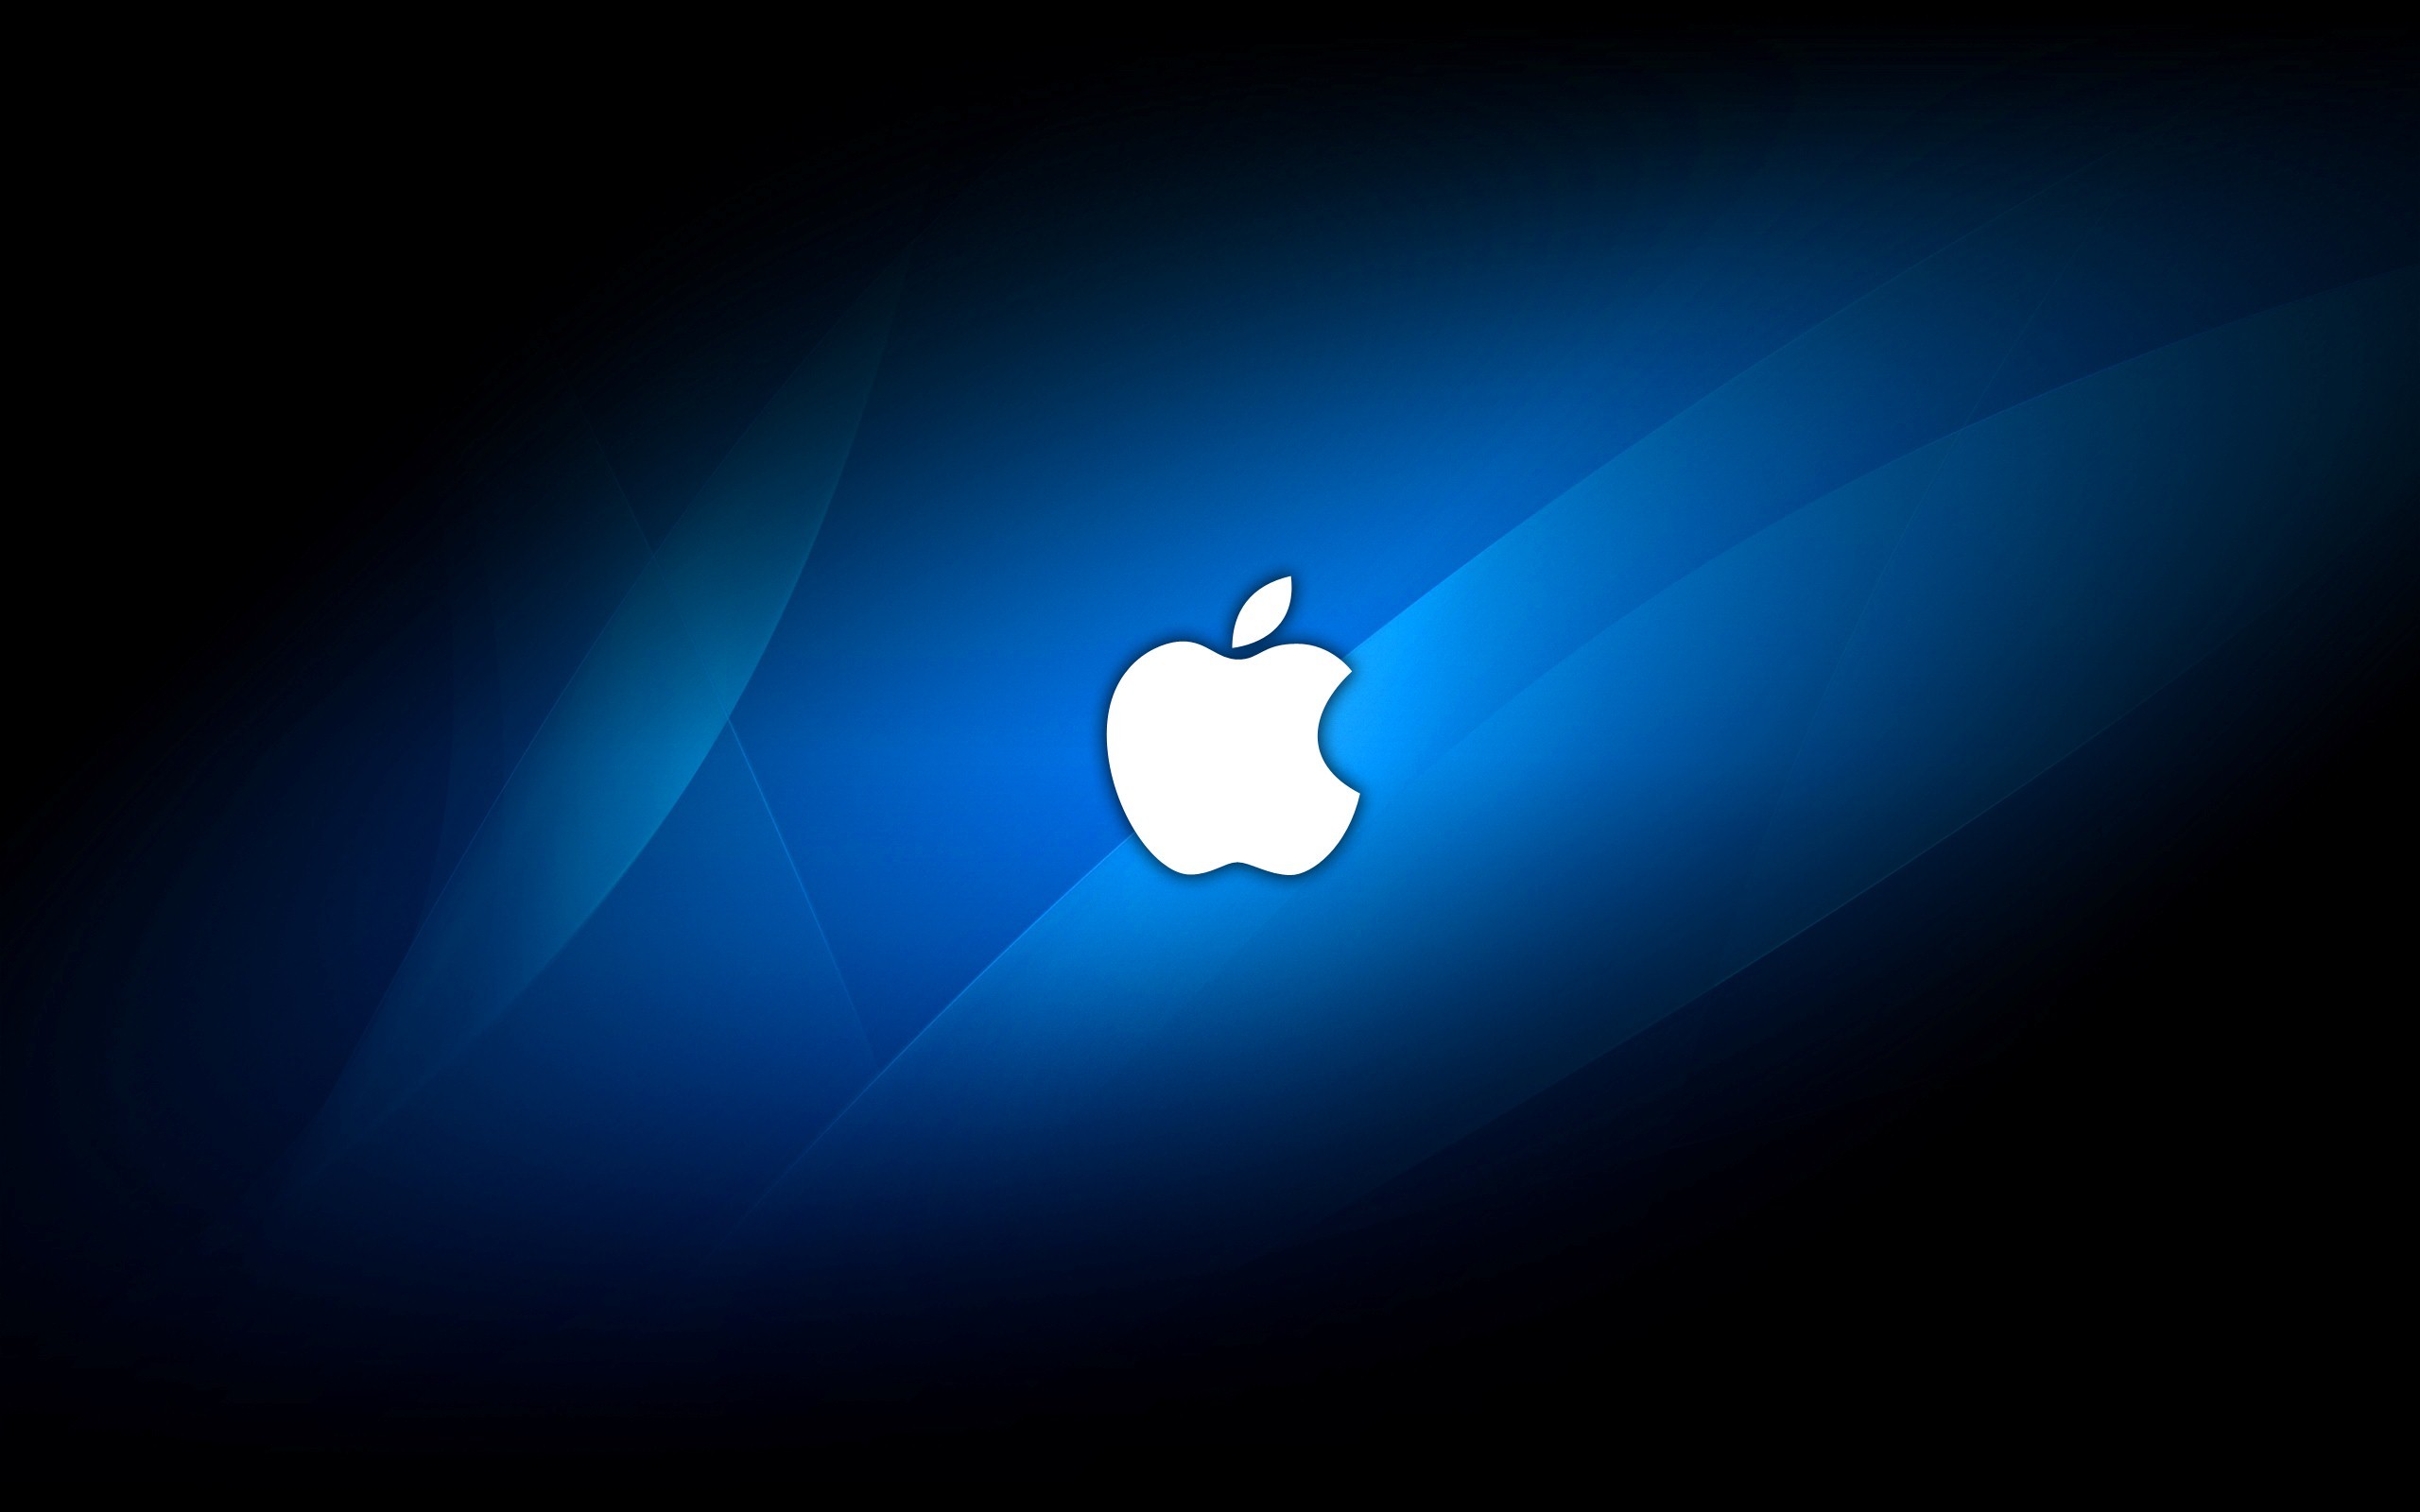 2560x1600 Apple Company Logo in Blue Background Image